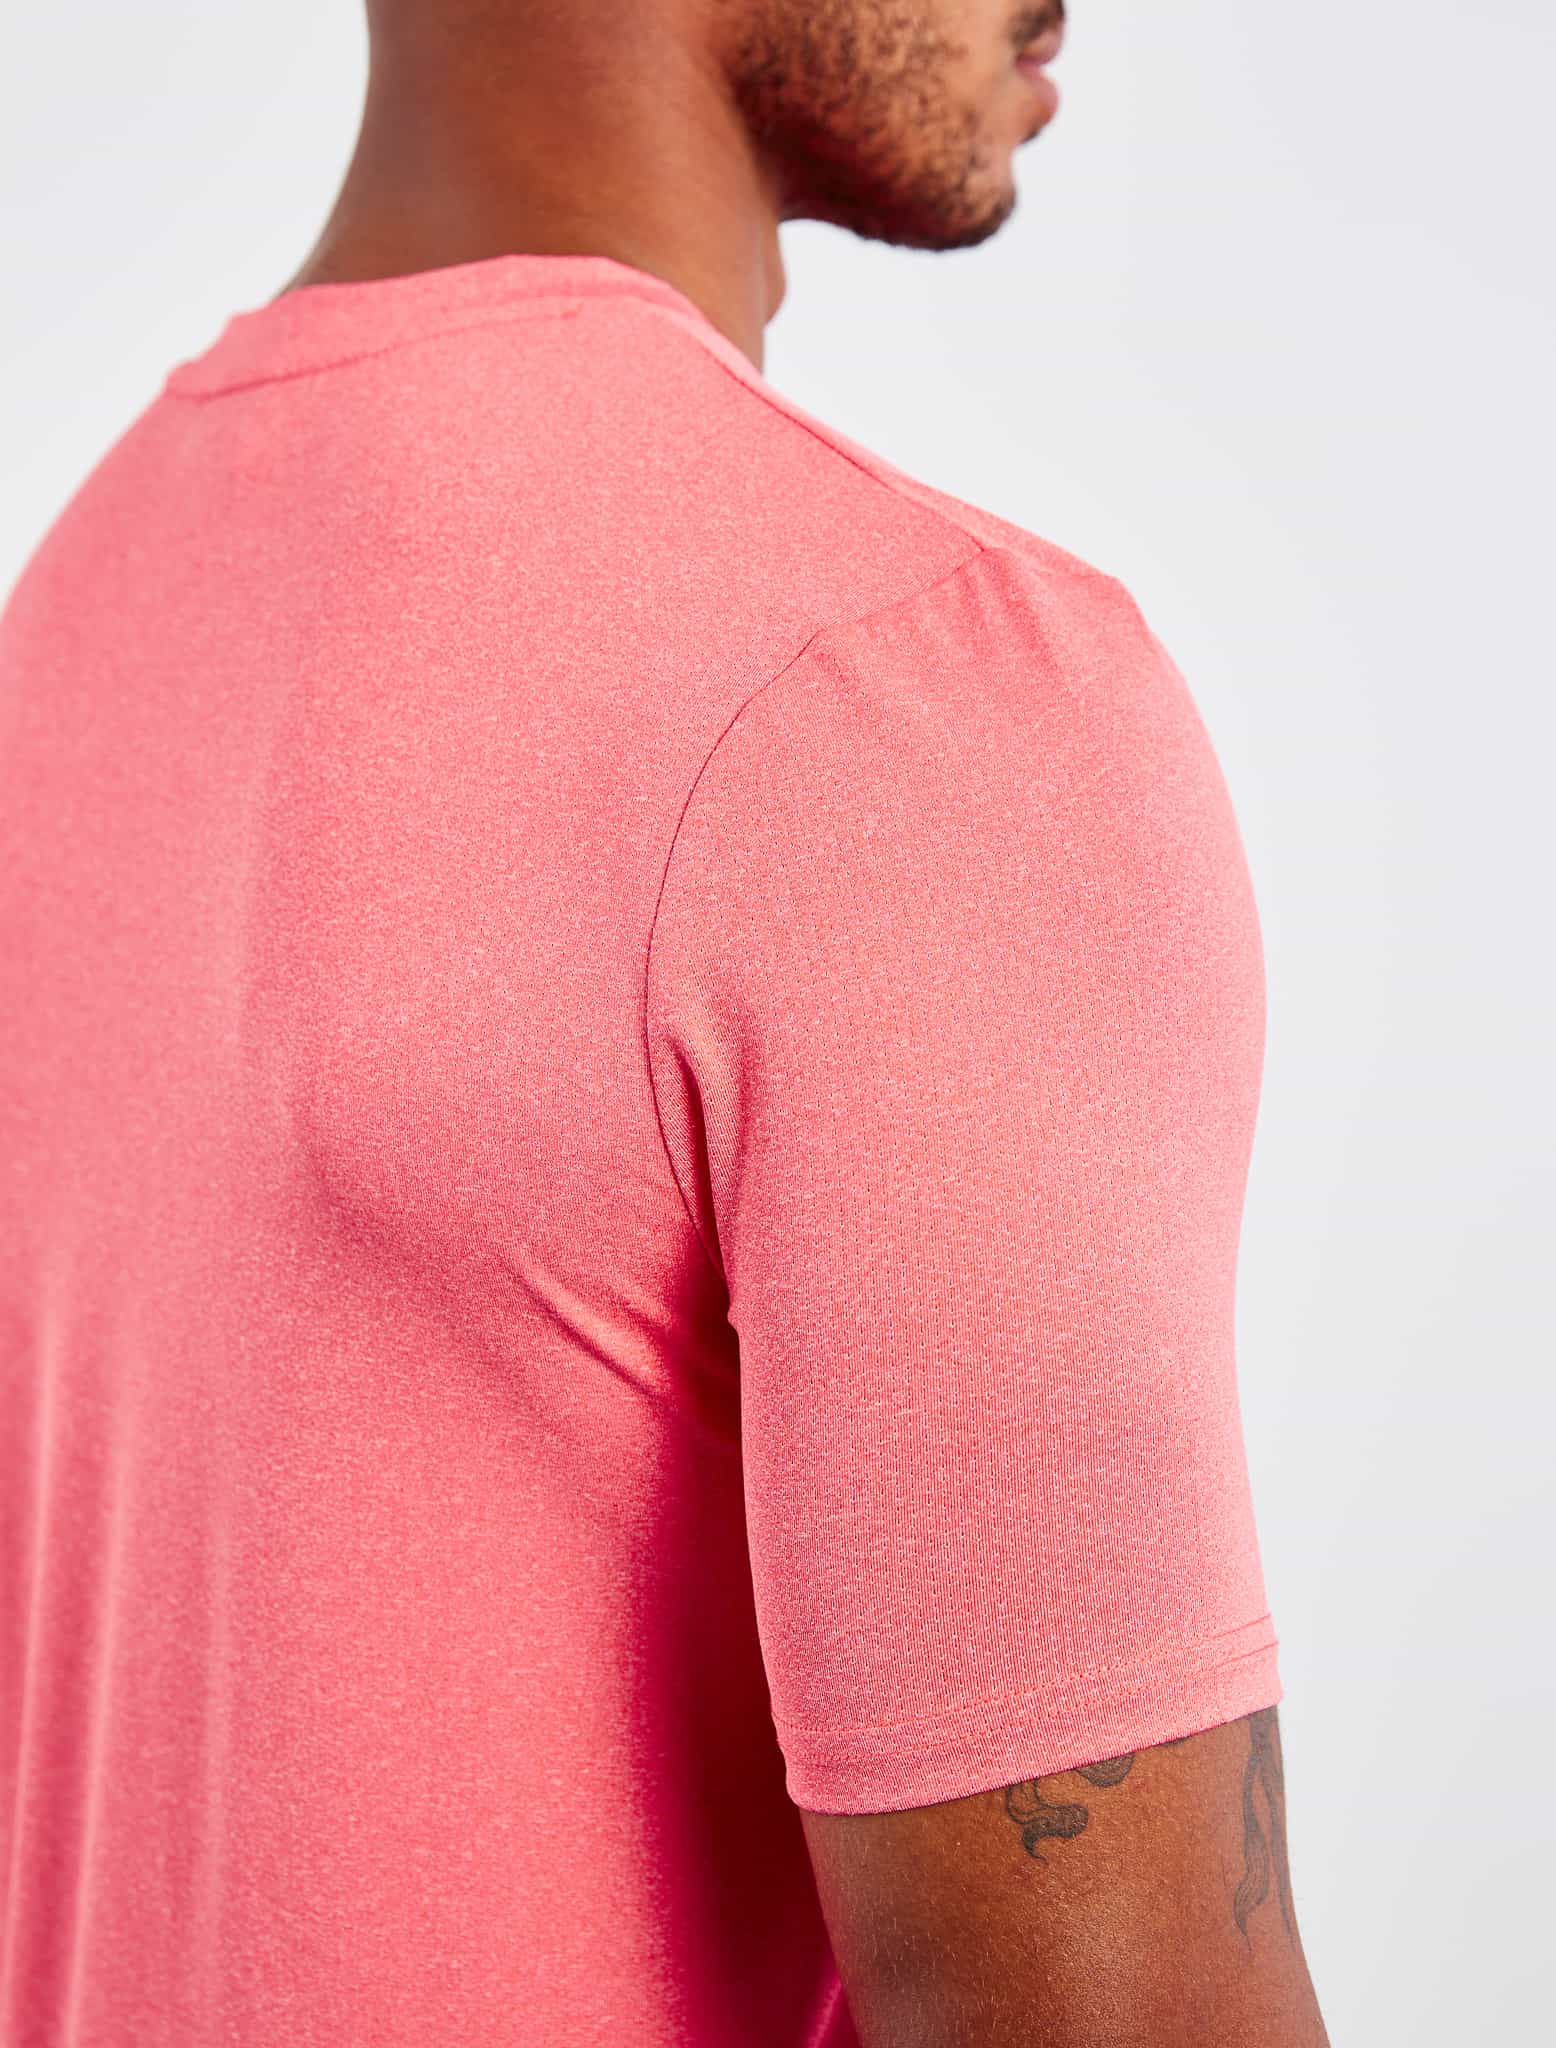 Training T-Shirt / Coral Pursue Fitness 3